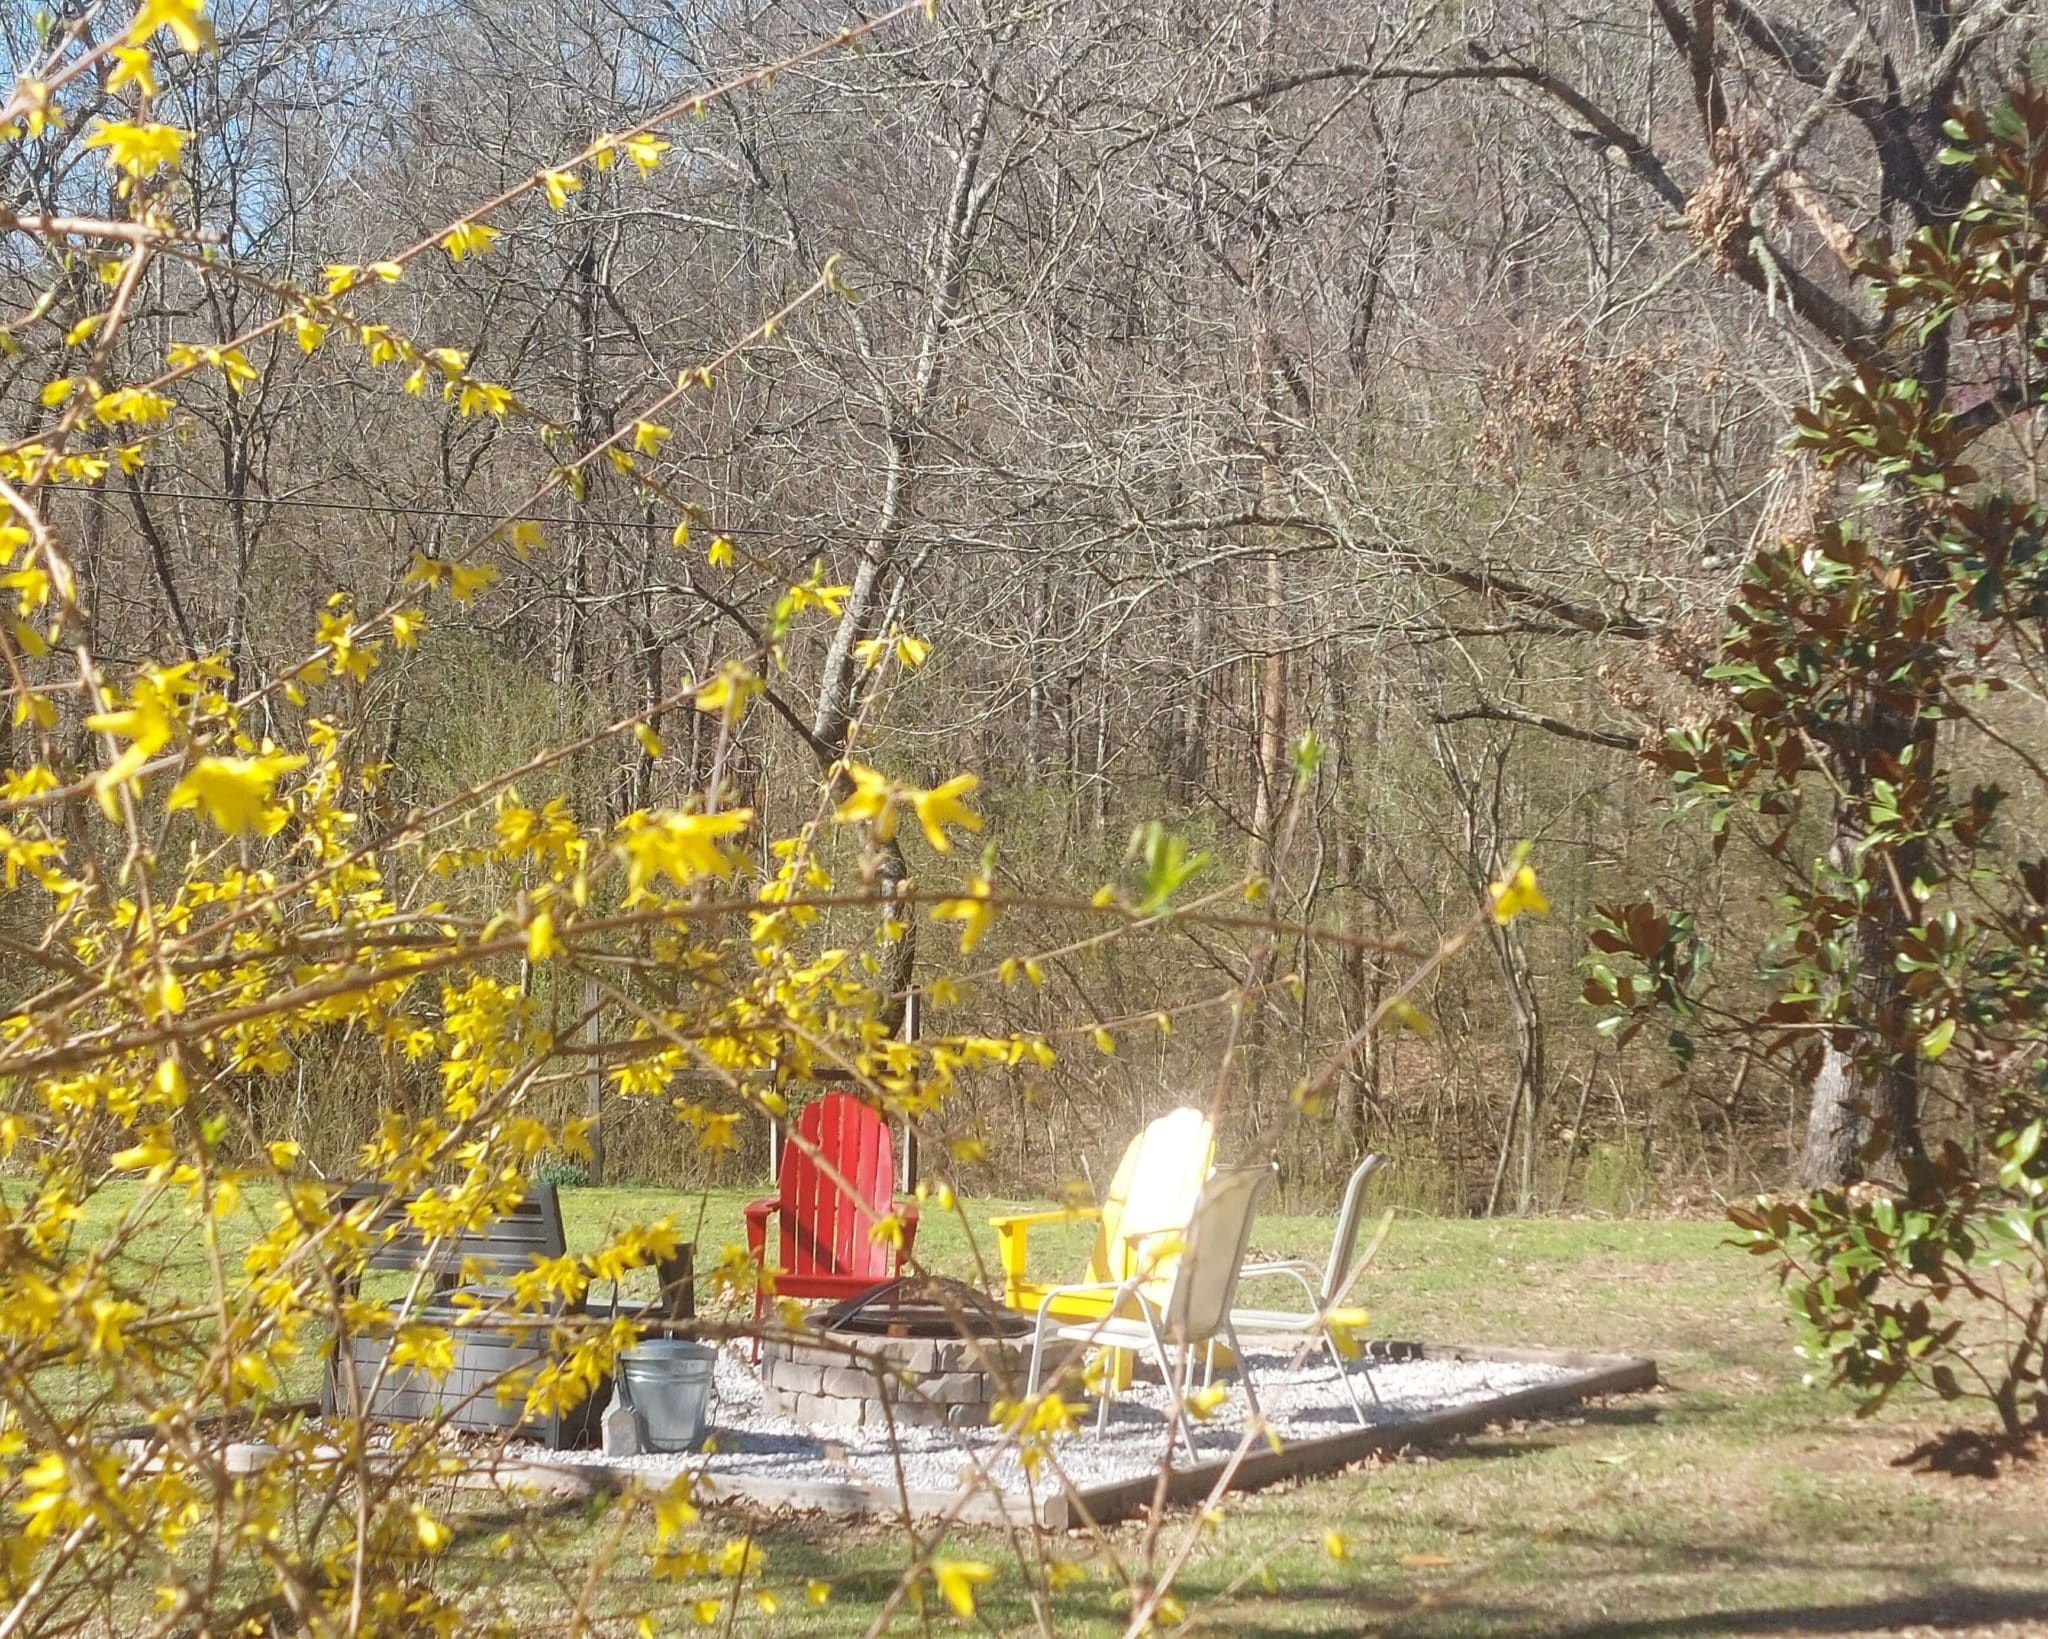 yellow forsythia bush in front of a stone fire pit with one red chair, one yellow chair, and two white chairs. A wooded area sits in the background.